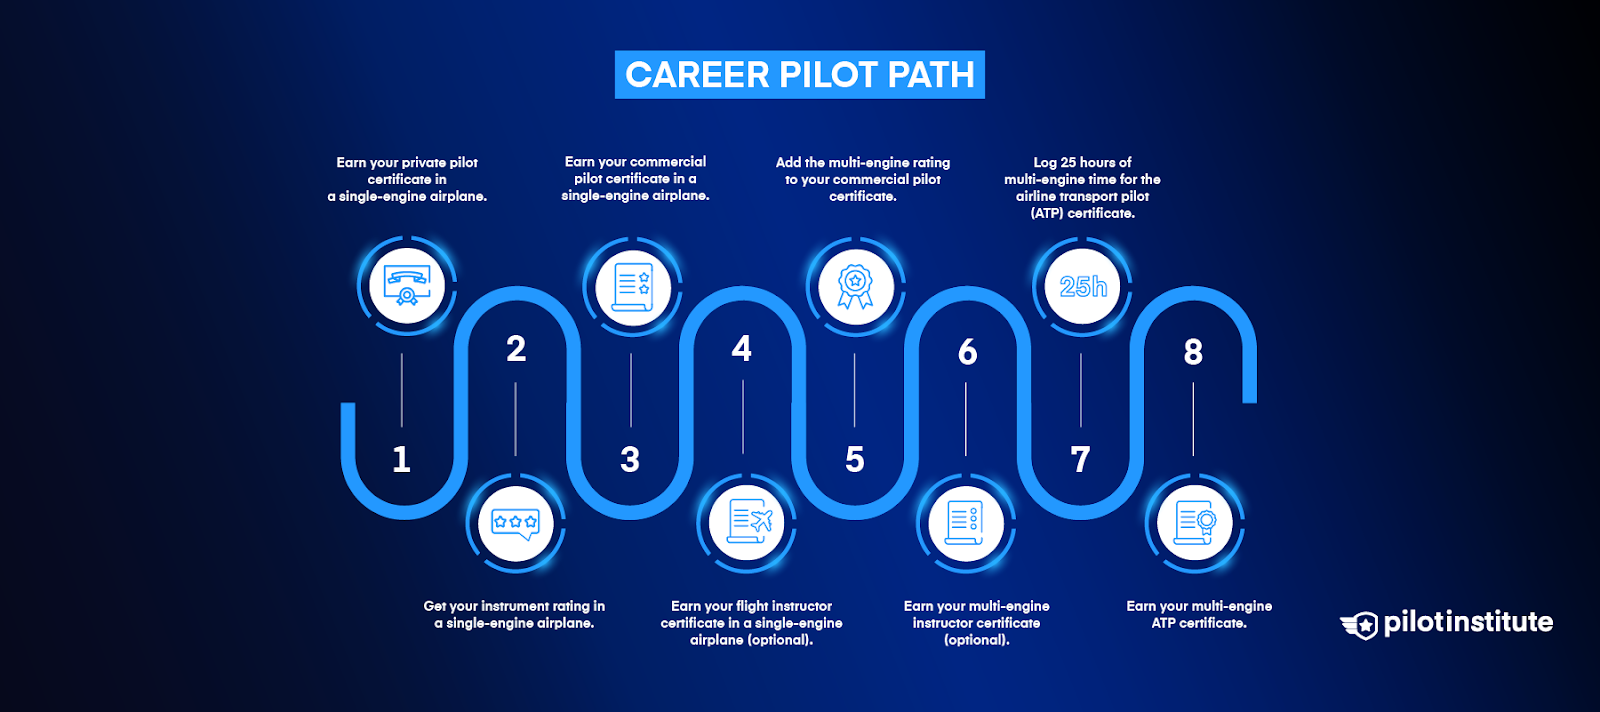 A diagram showing the path to obtaining your multi-engine rating as a career pilot.